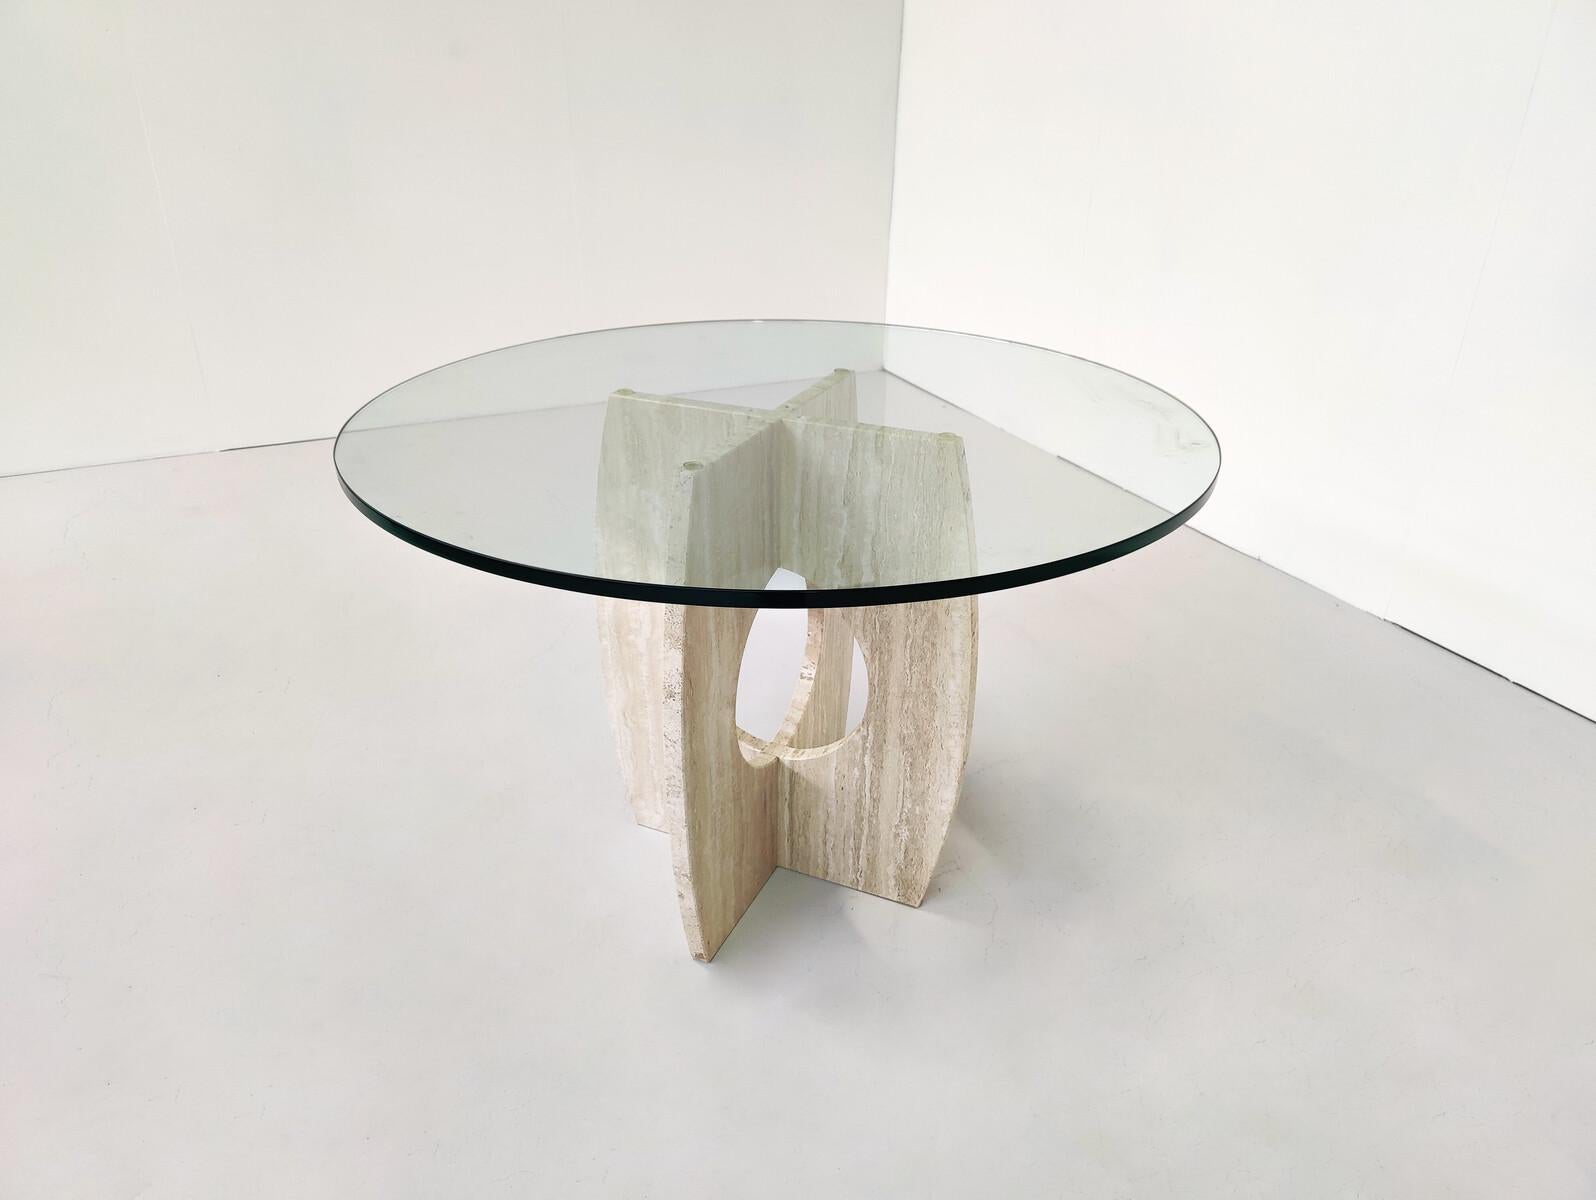 Late 20th Century Mid-Century Modern Glass and Travertine Dining Table, Italy , 1970s For Sale